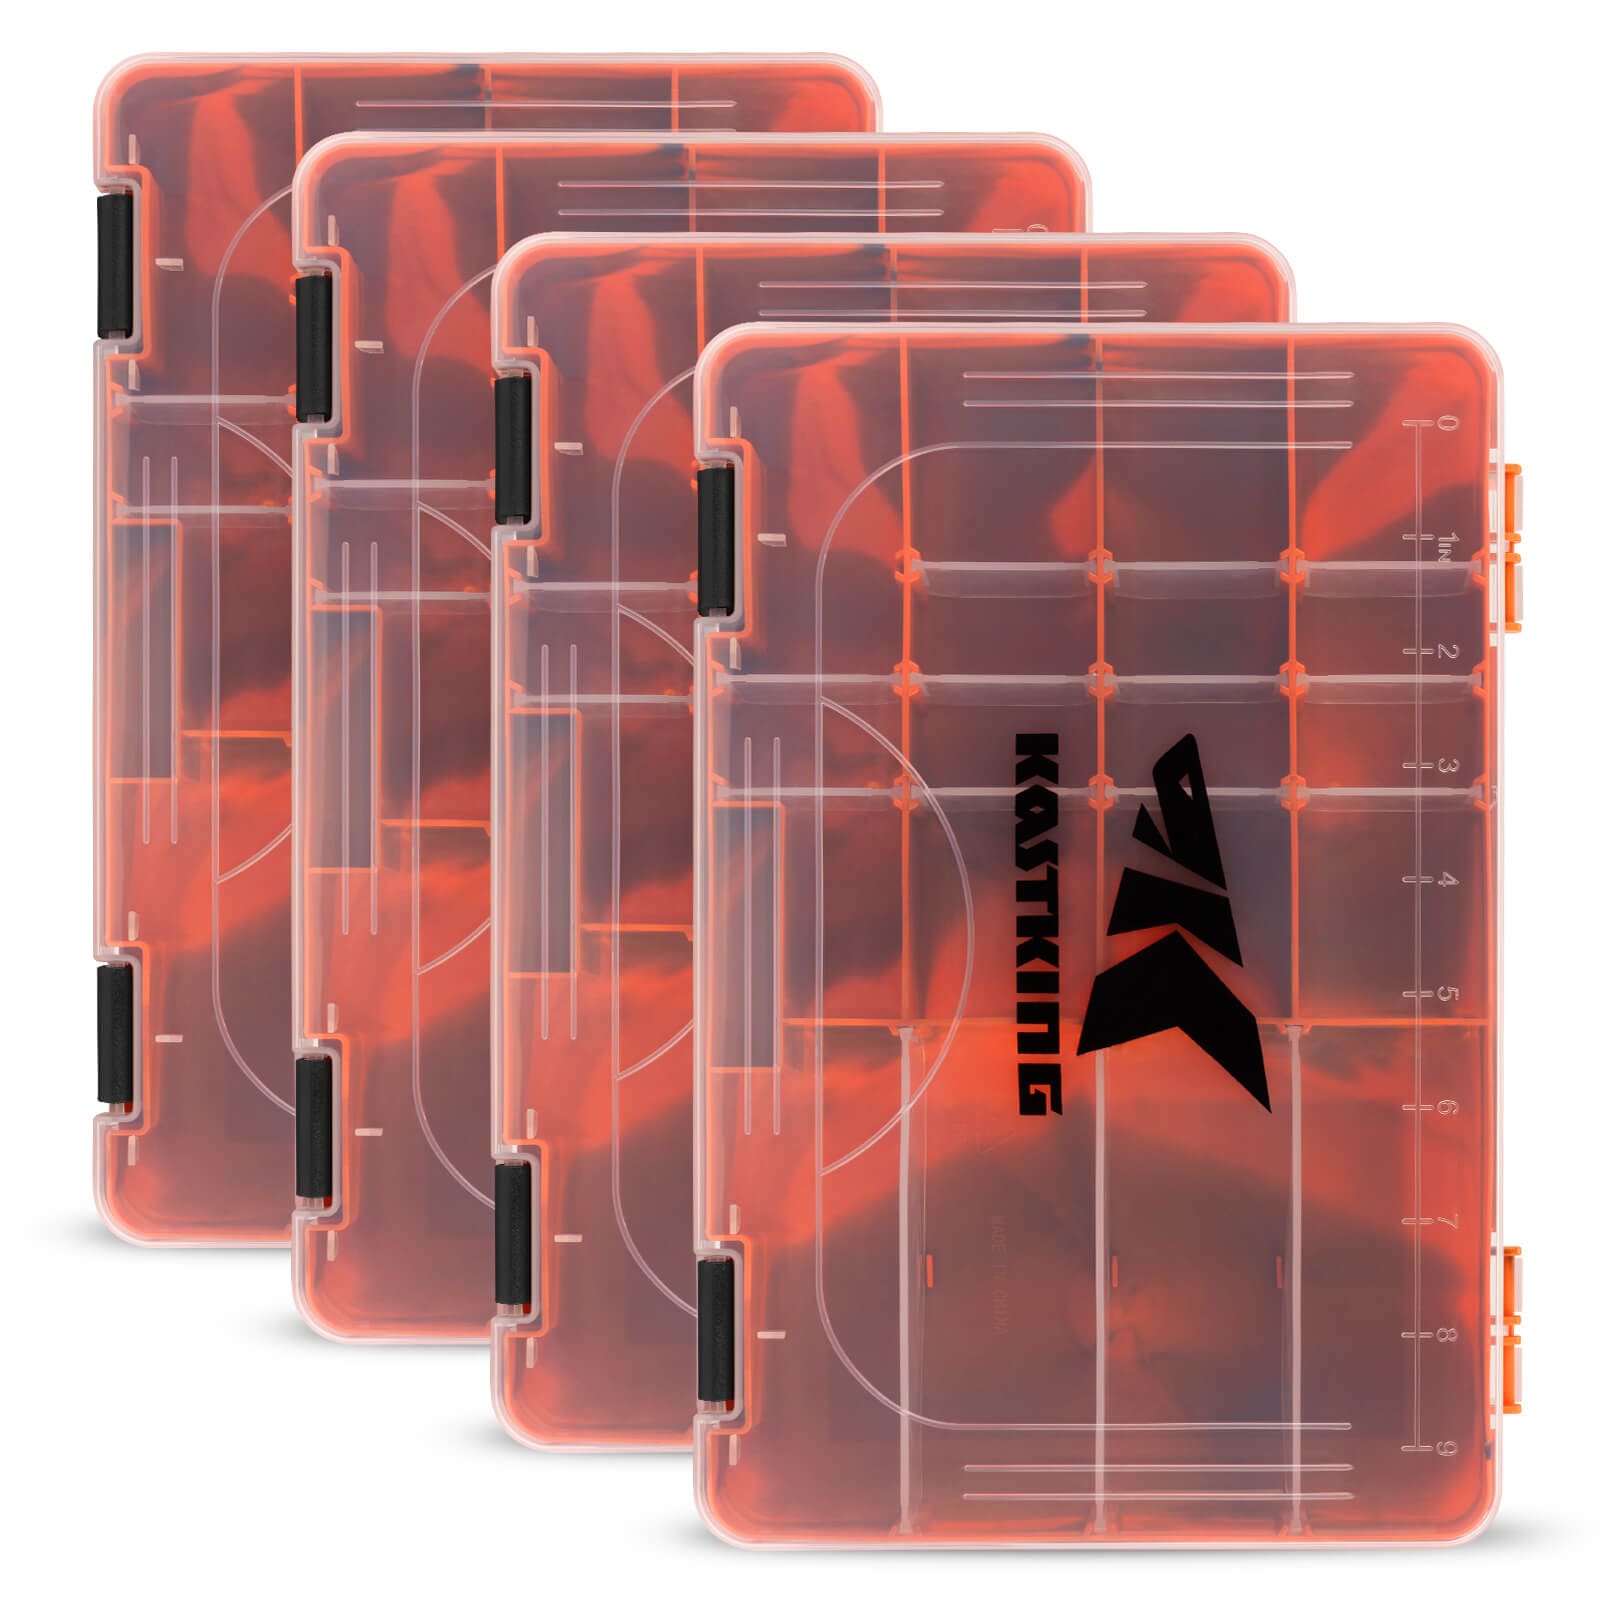 Red Fishing Tackle Boxes